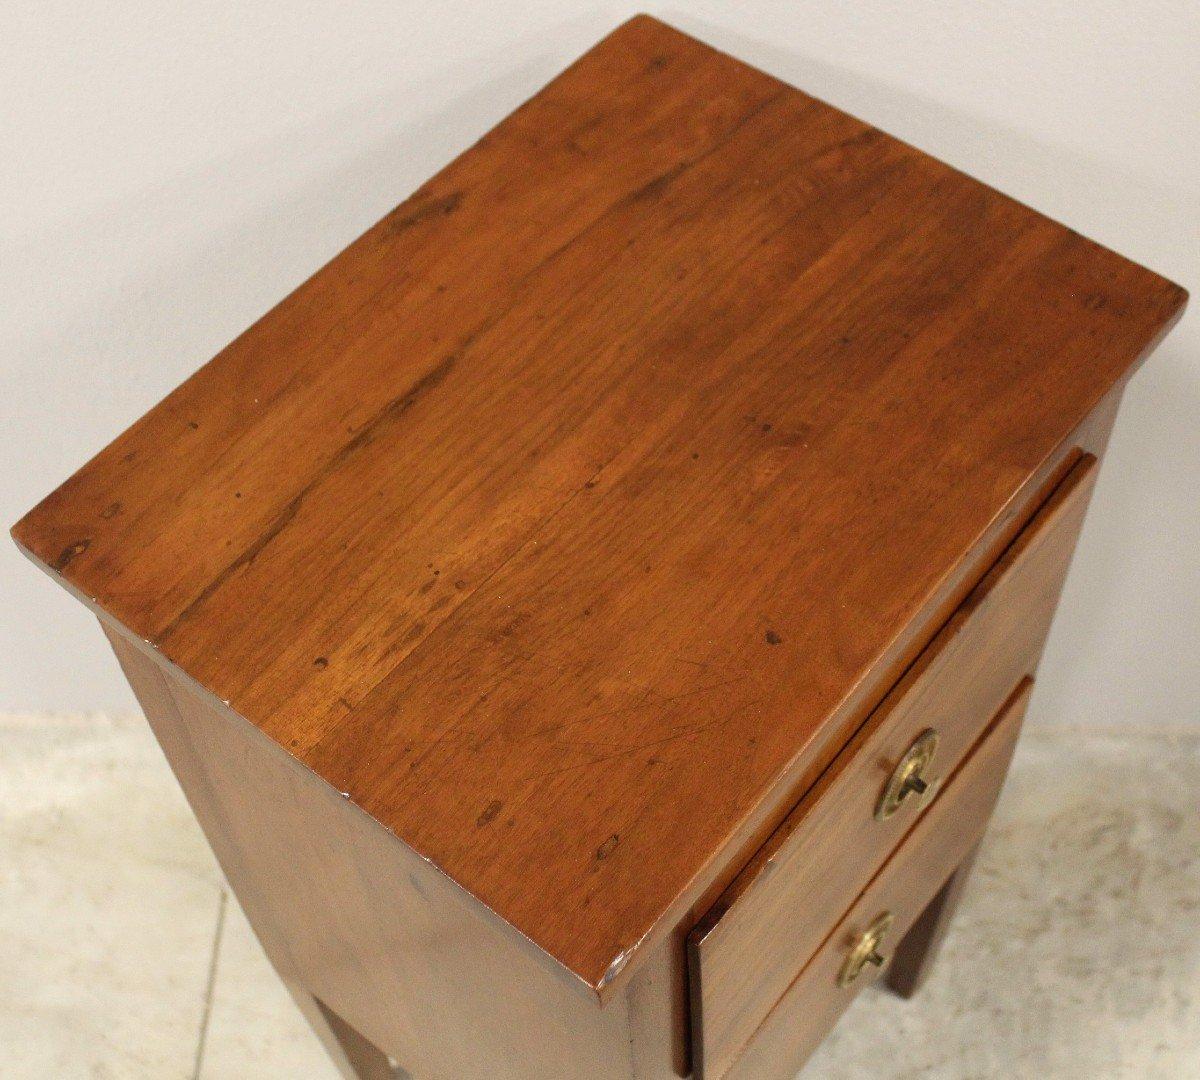 18th Century and Earlier 18th Century Italian Walnut Bedside Table with Two Drawers and Tapered Legs